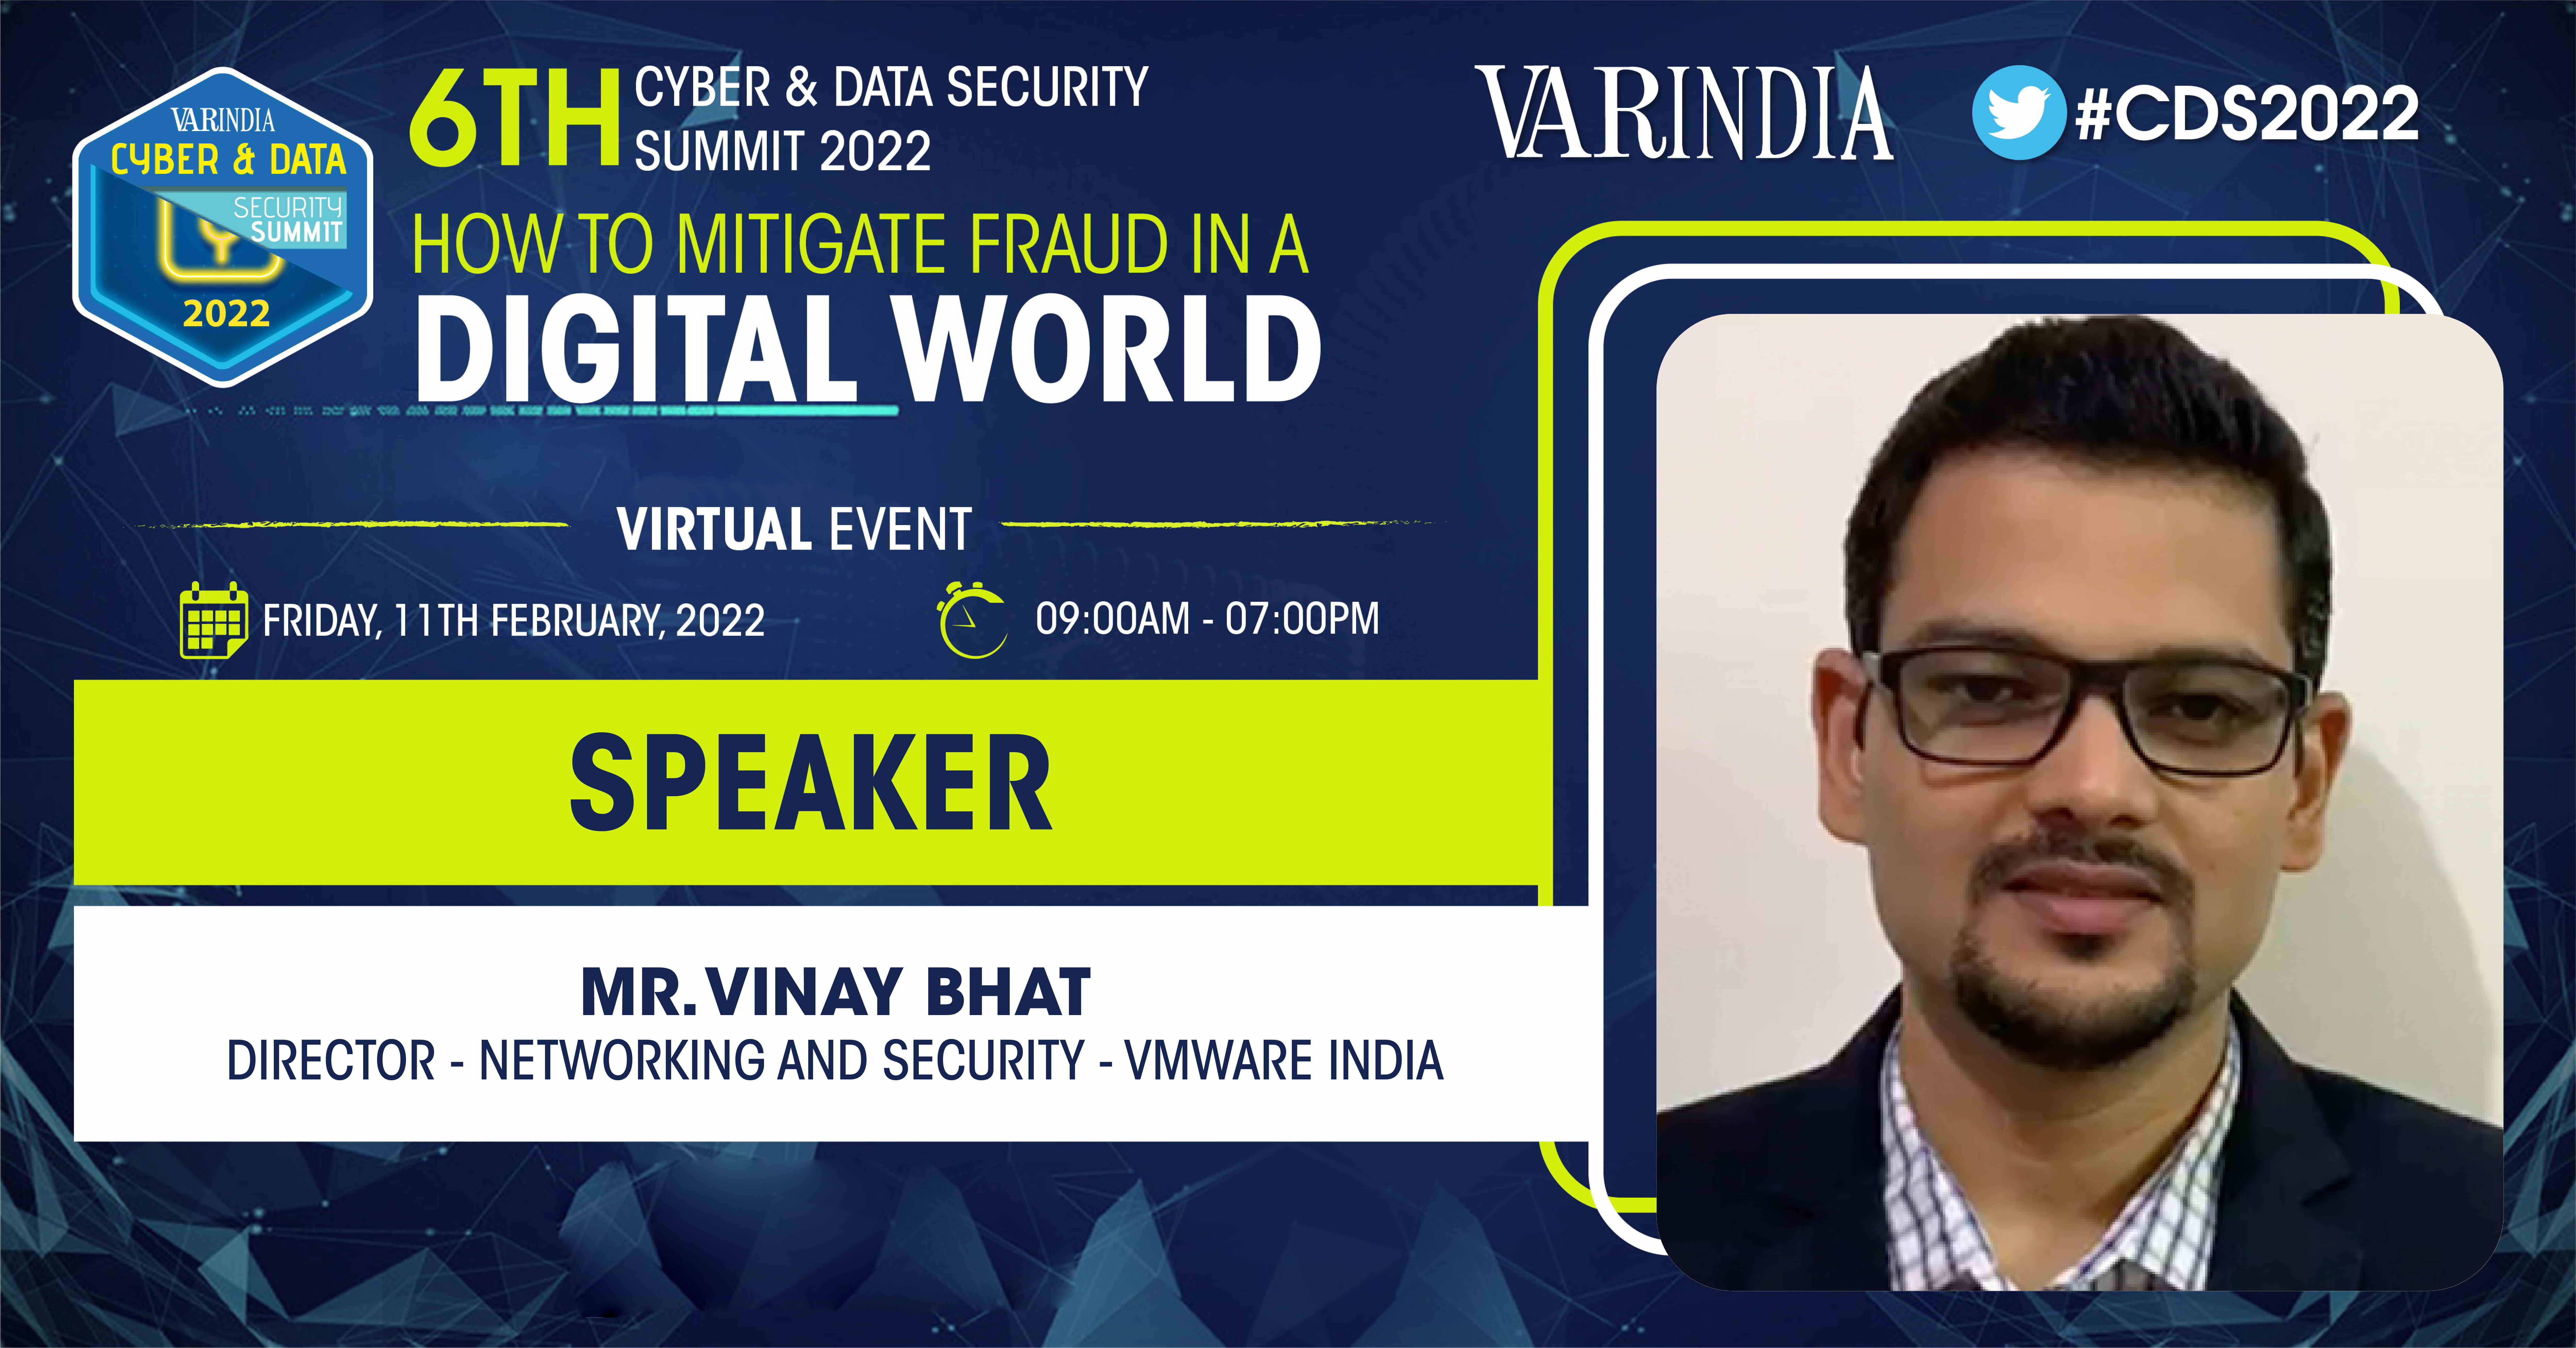 Presentation by Vinay Bhat, Director - Networking and Security, VMware India